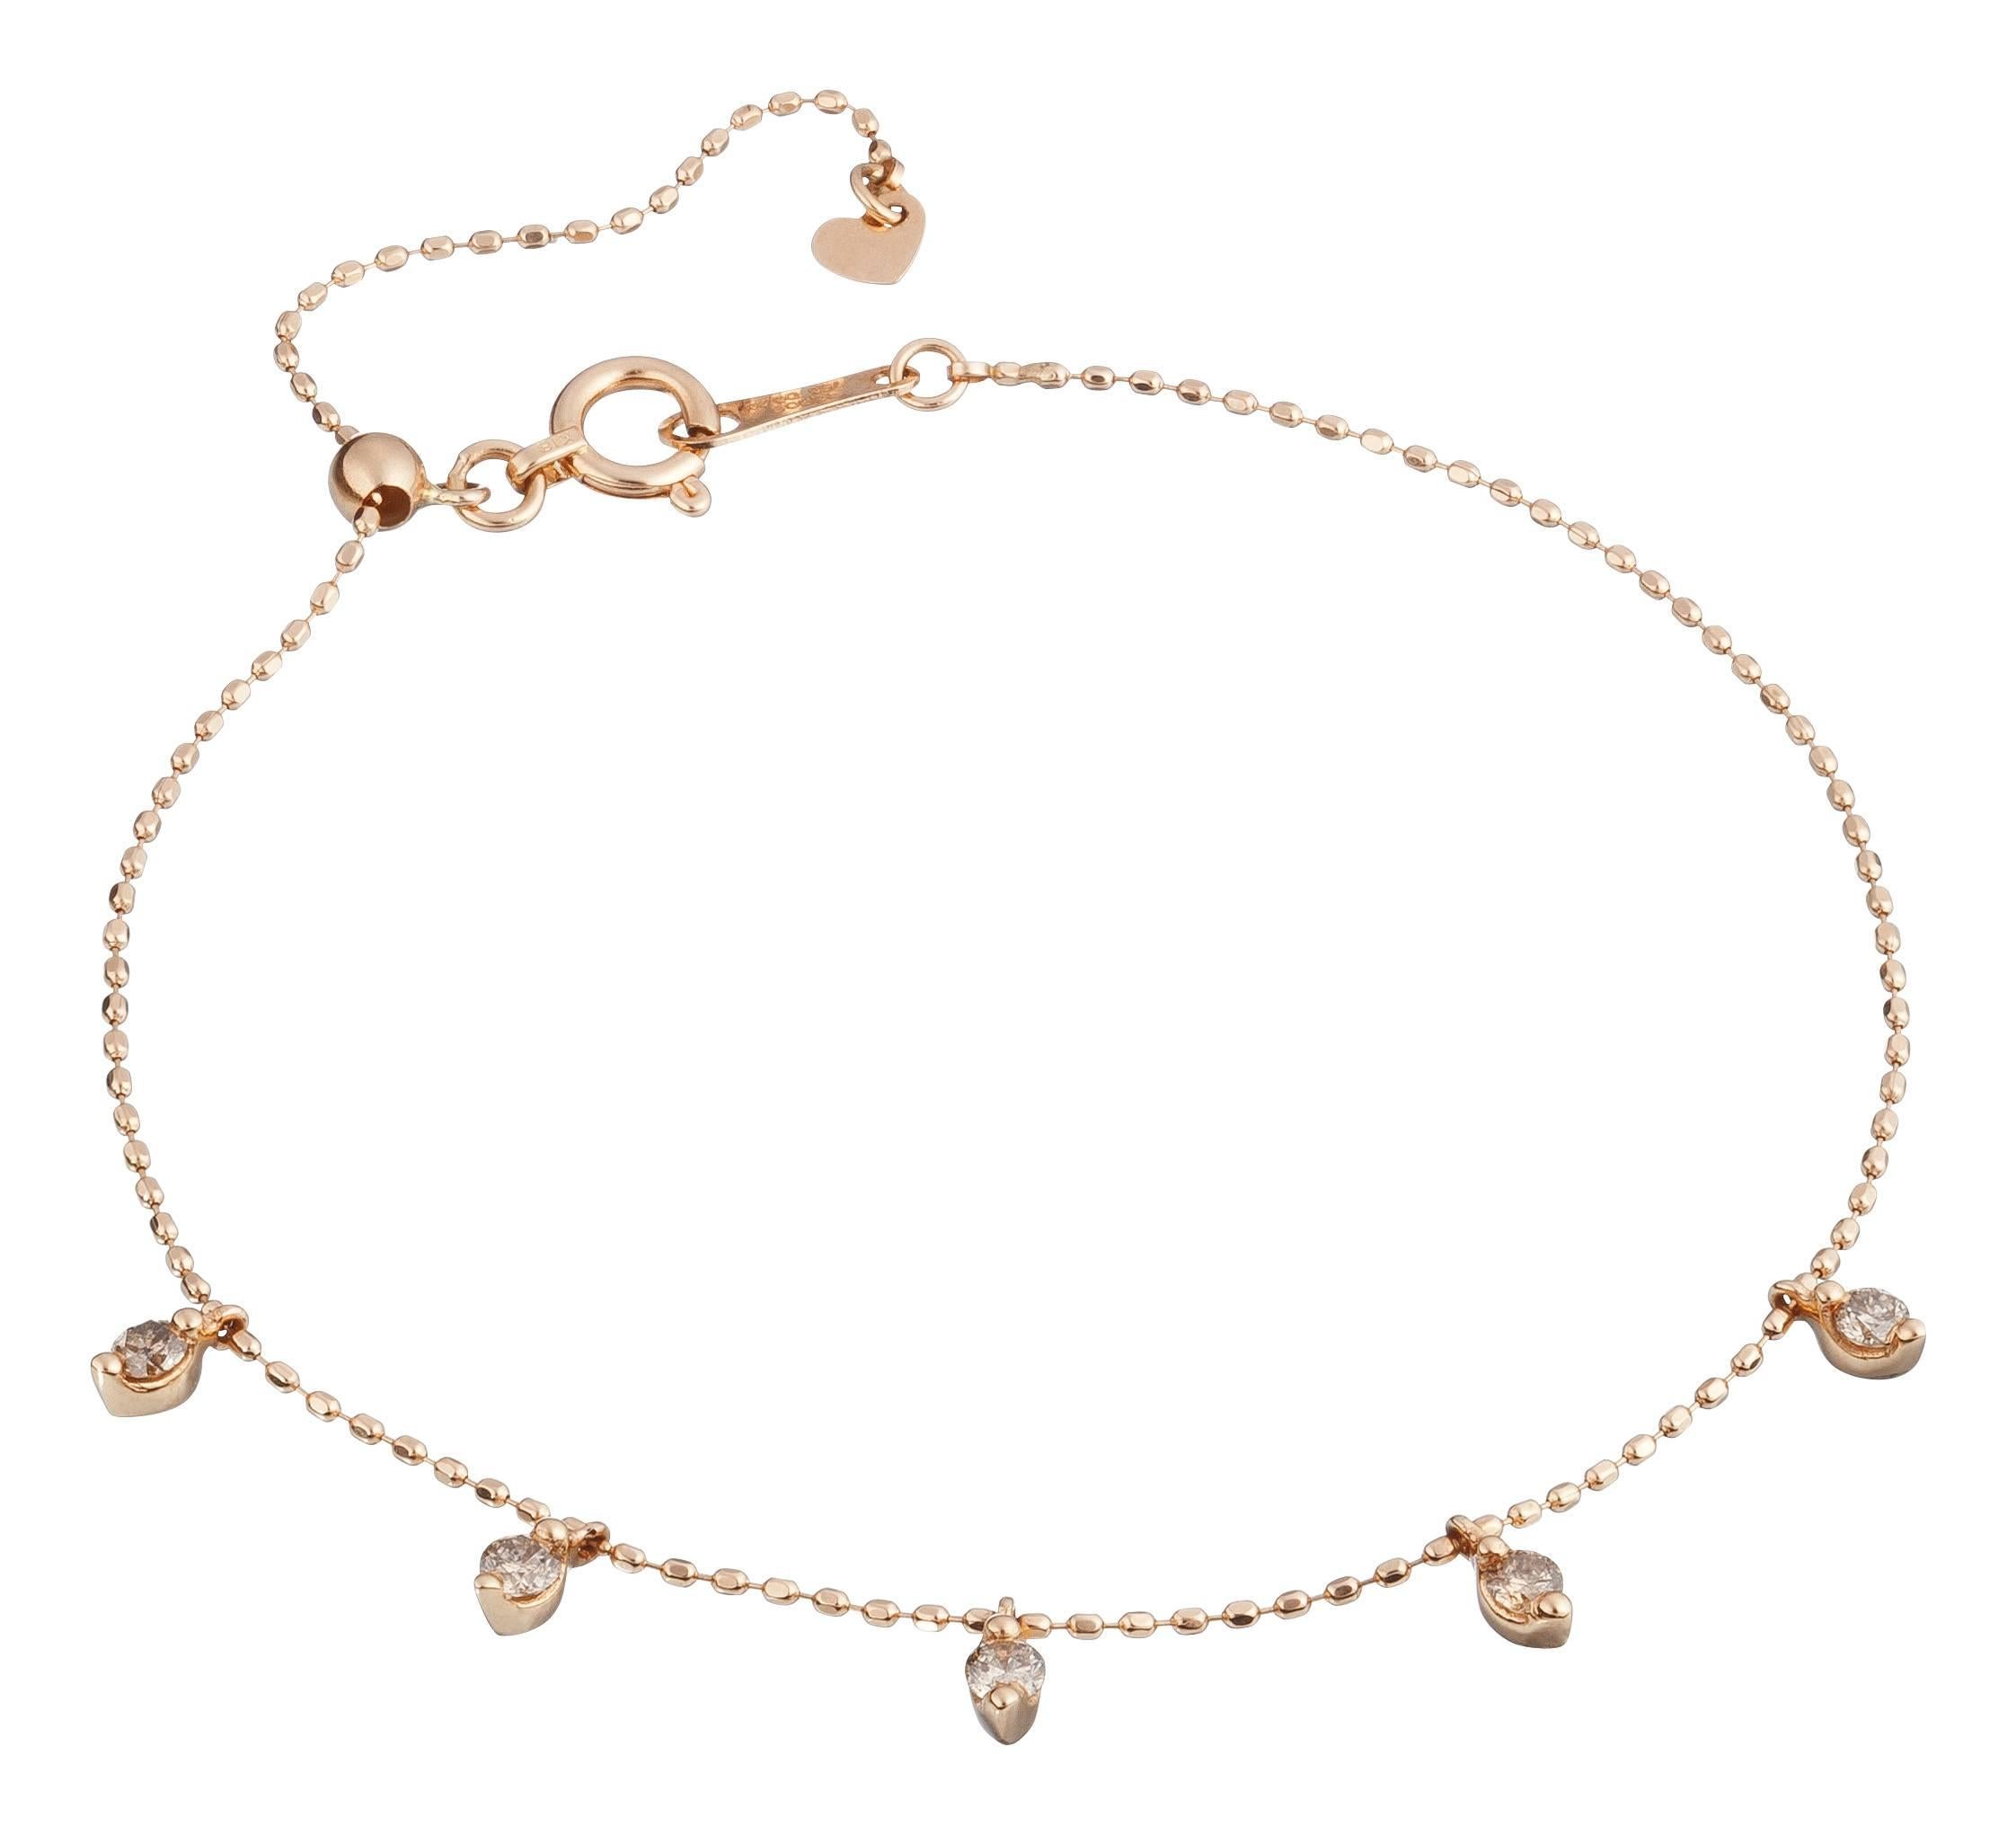 The Bracelet SARAH is made of 18K rosé gold with 13 white diamonds, 0,20 ct.	

one size. The bracelet is adjustable.

We also do offer the matching Necklace.